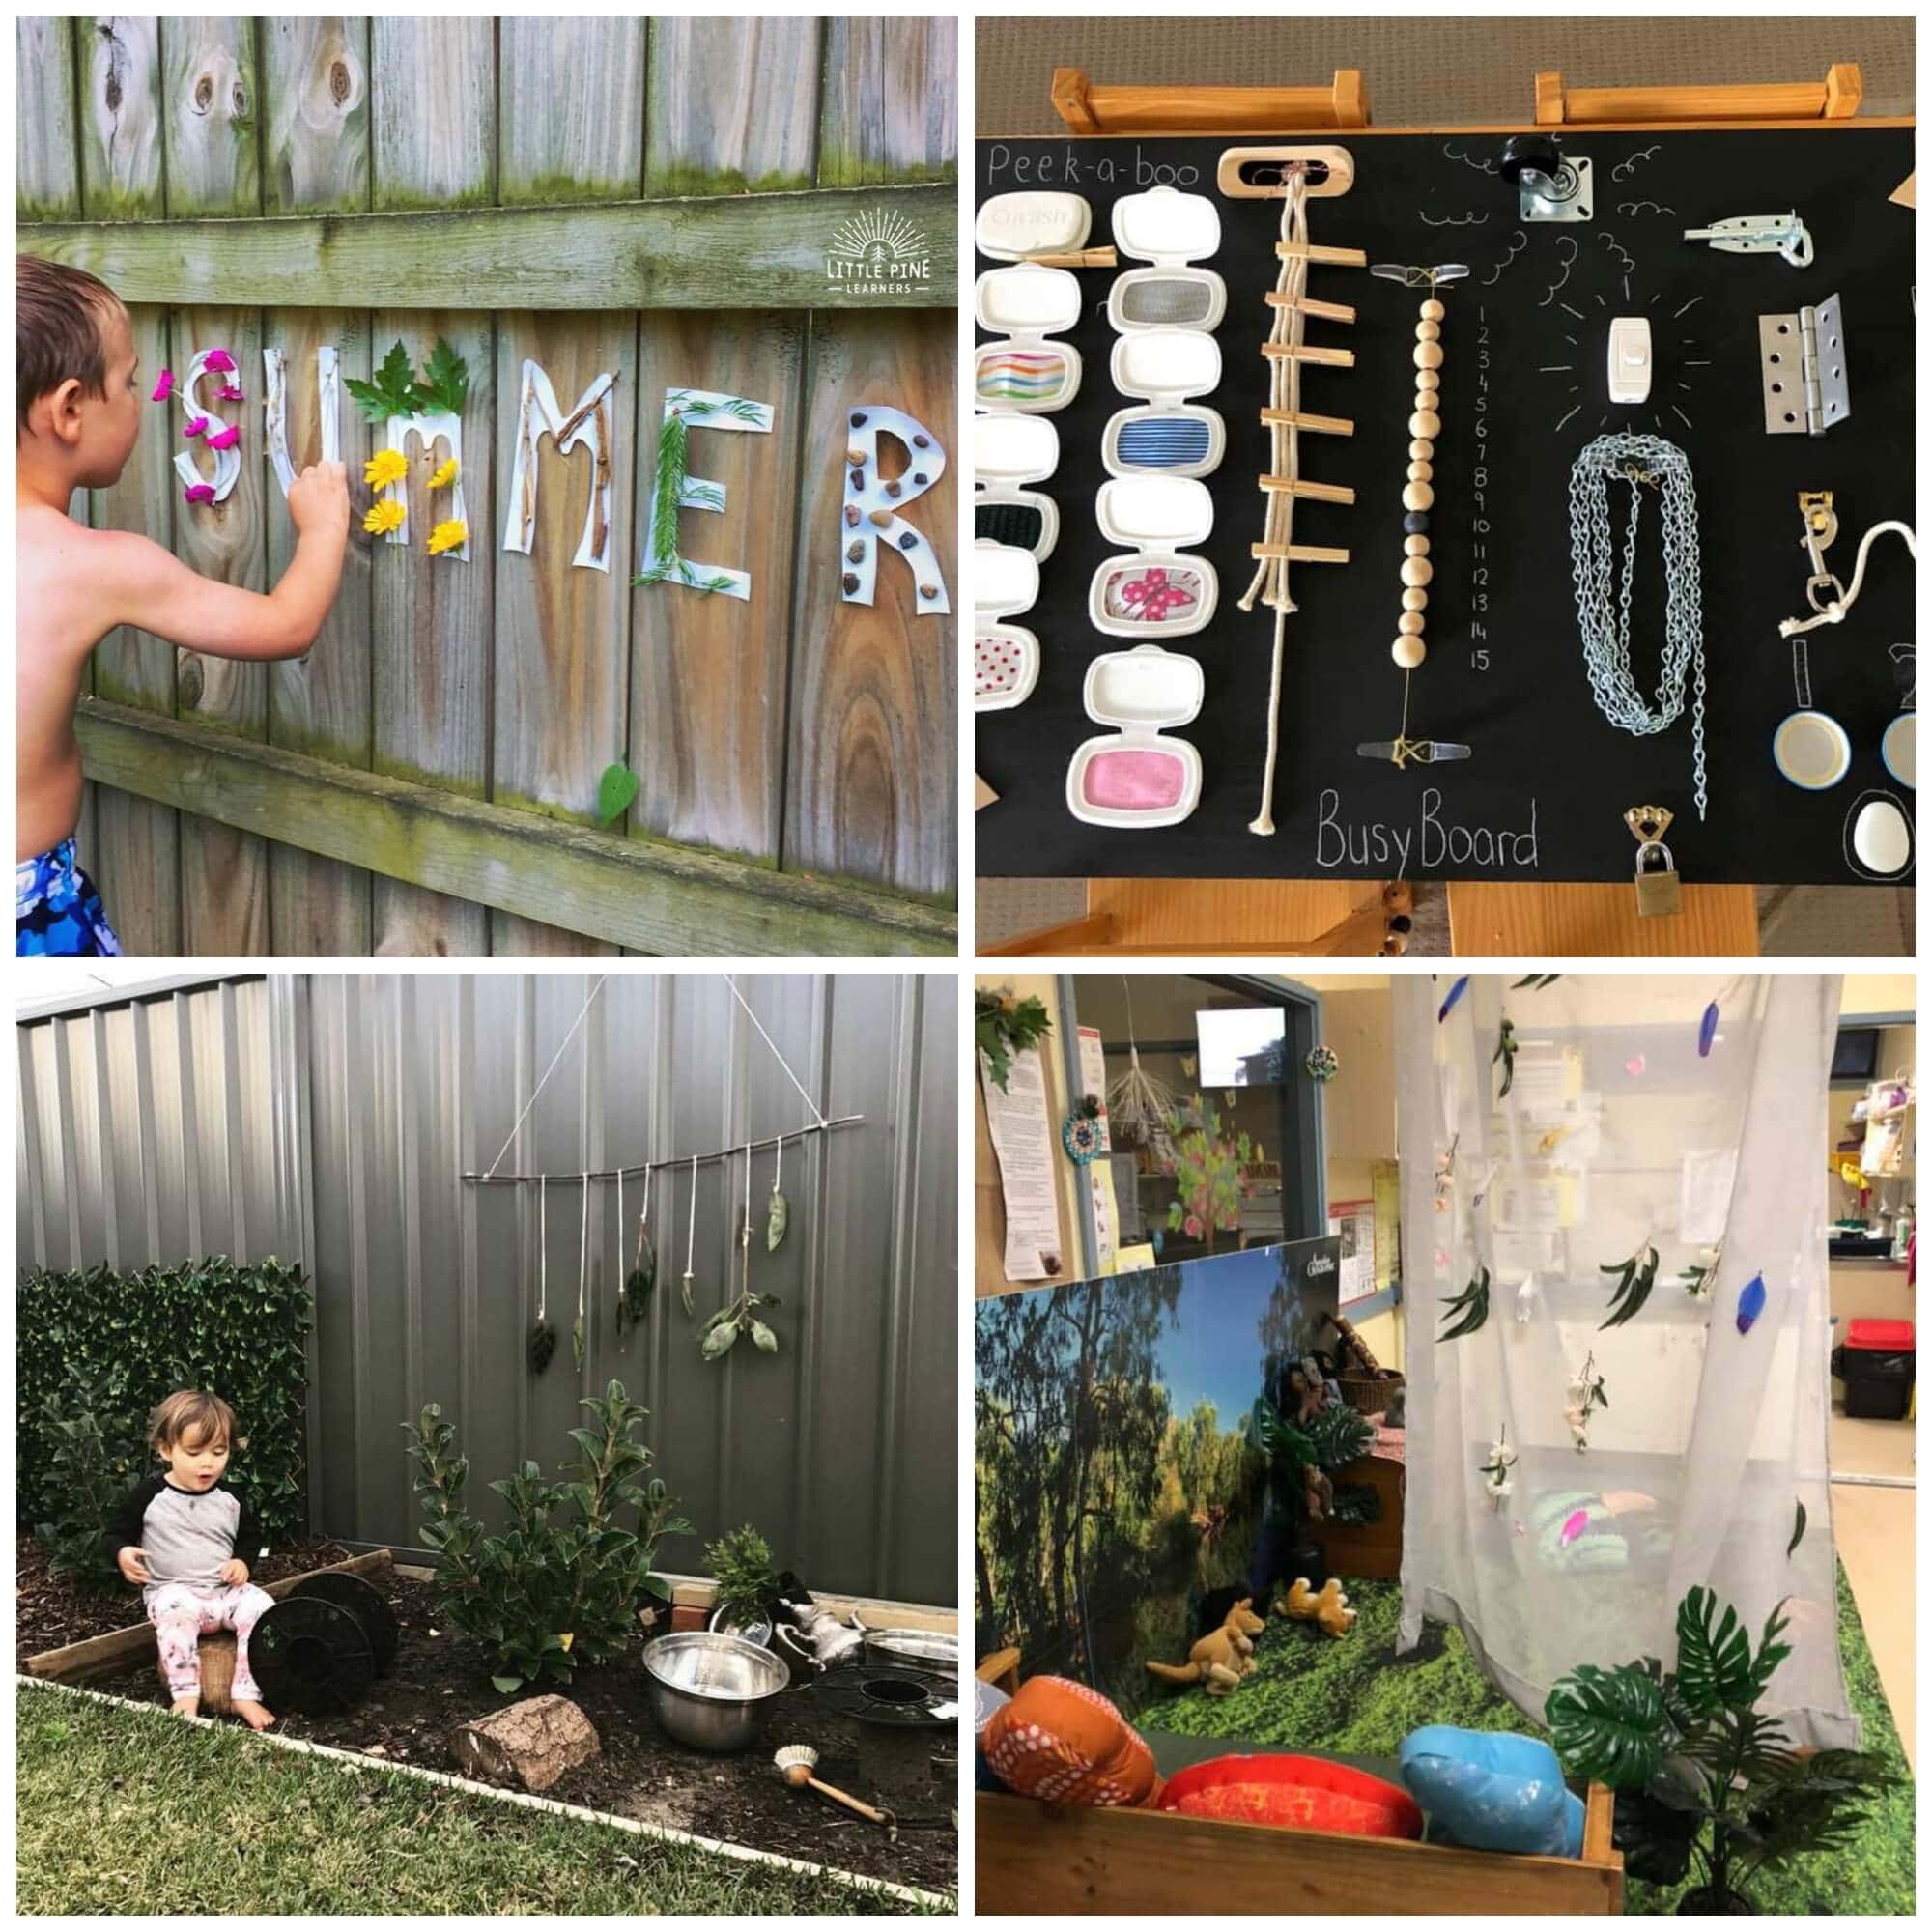 Provide playful sensory play experiences for younger children using this collection of easy DIY, budget friendly ideas from early childhood educators and parents around the world! Make your own sensory paths, walls and toys!